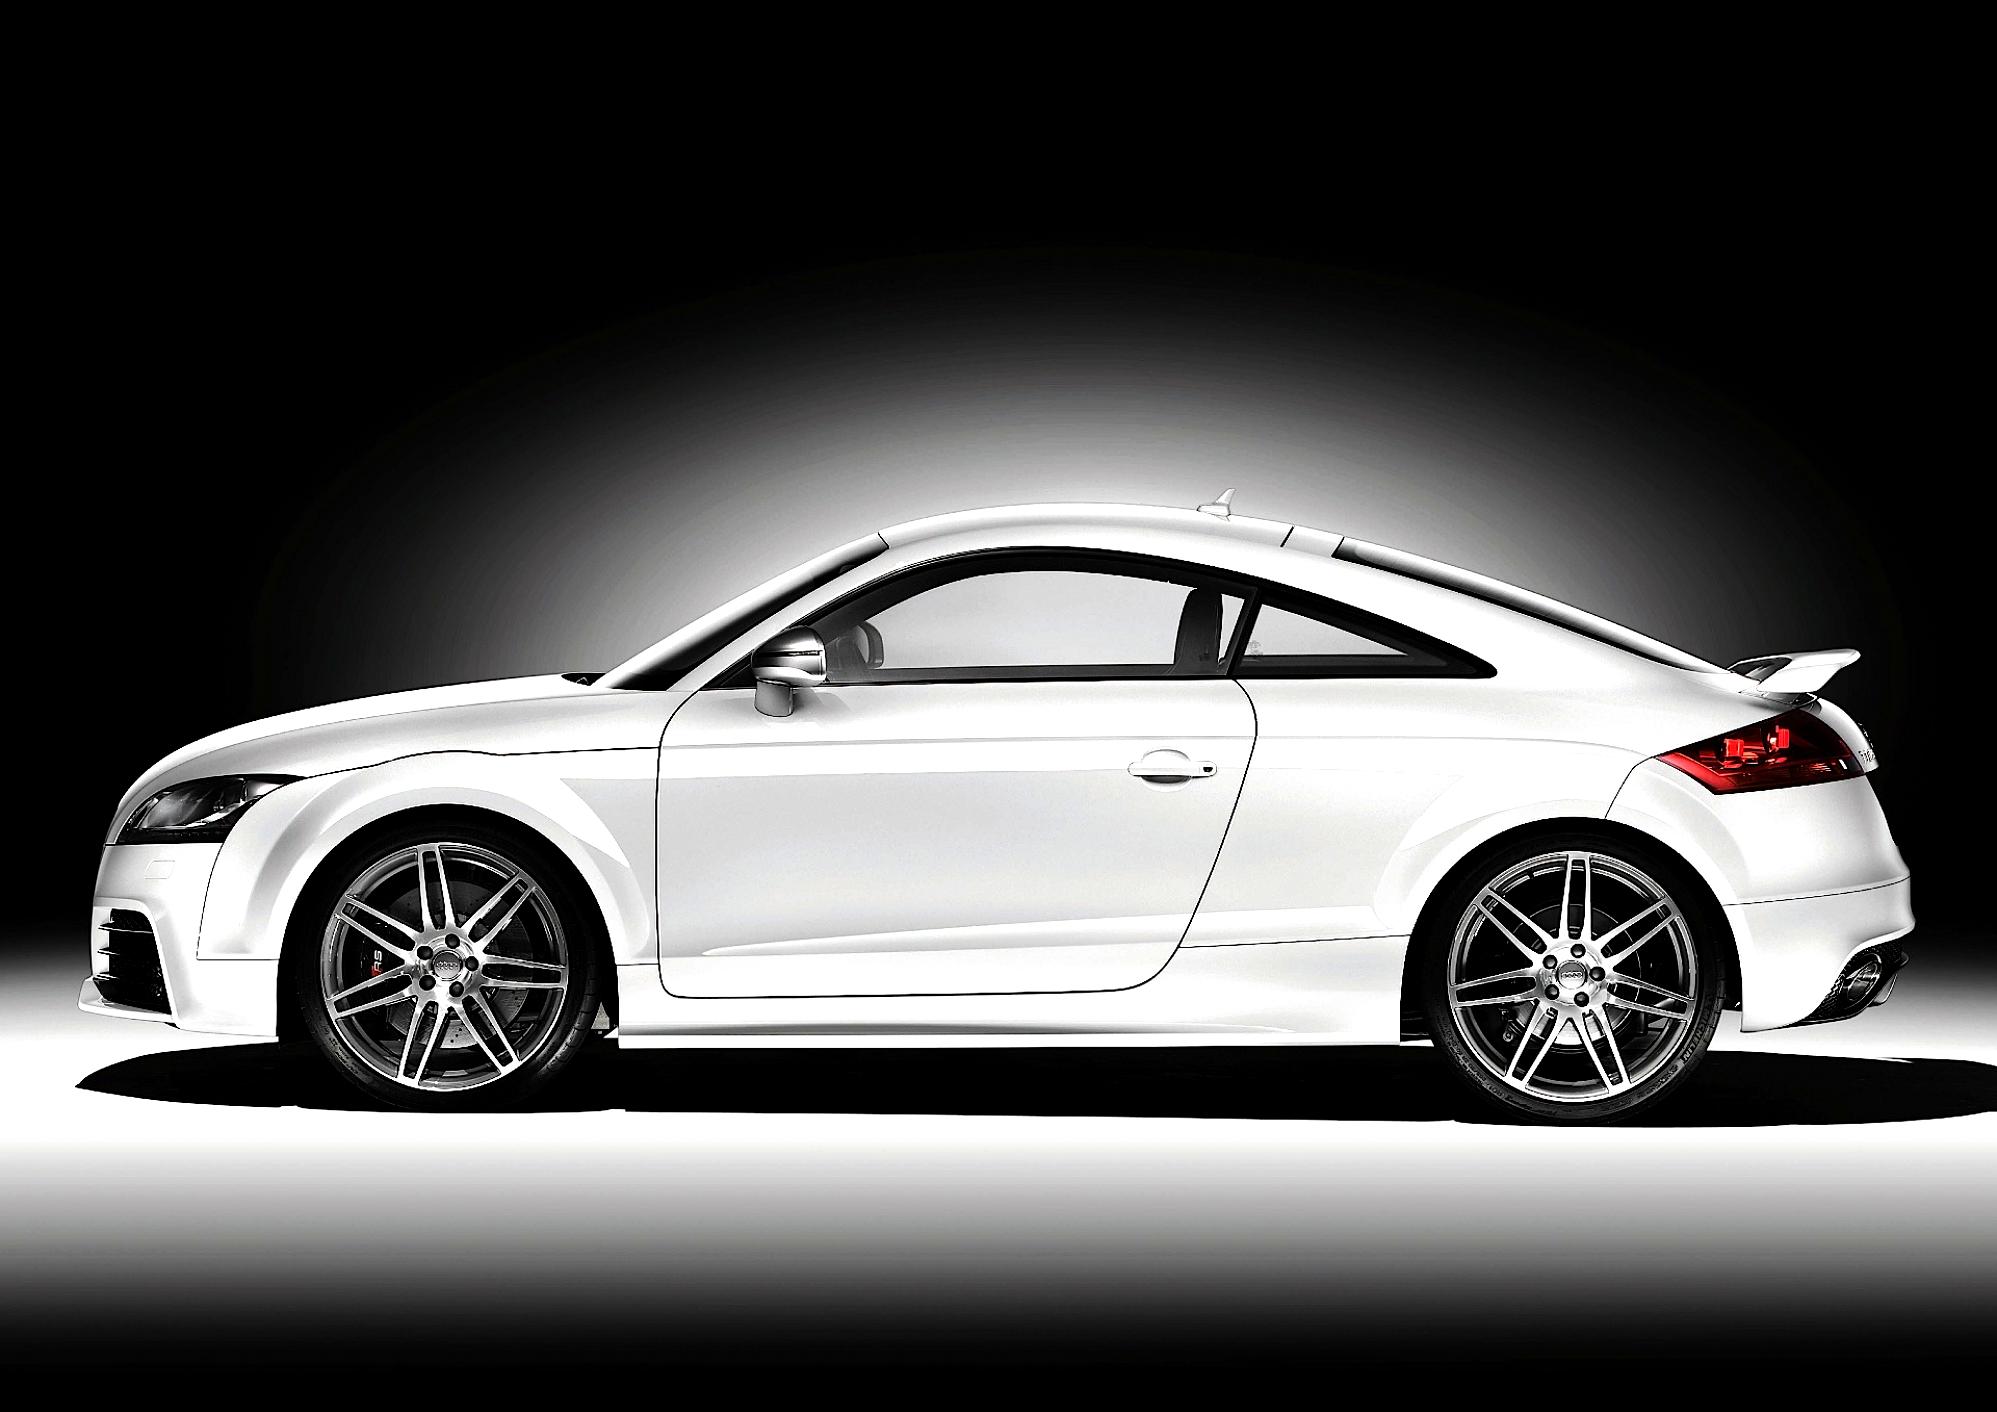 Audi TT RS Coupe 2009 #23